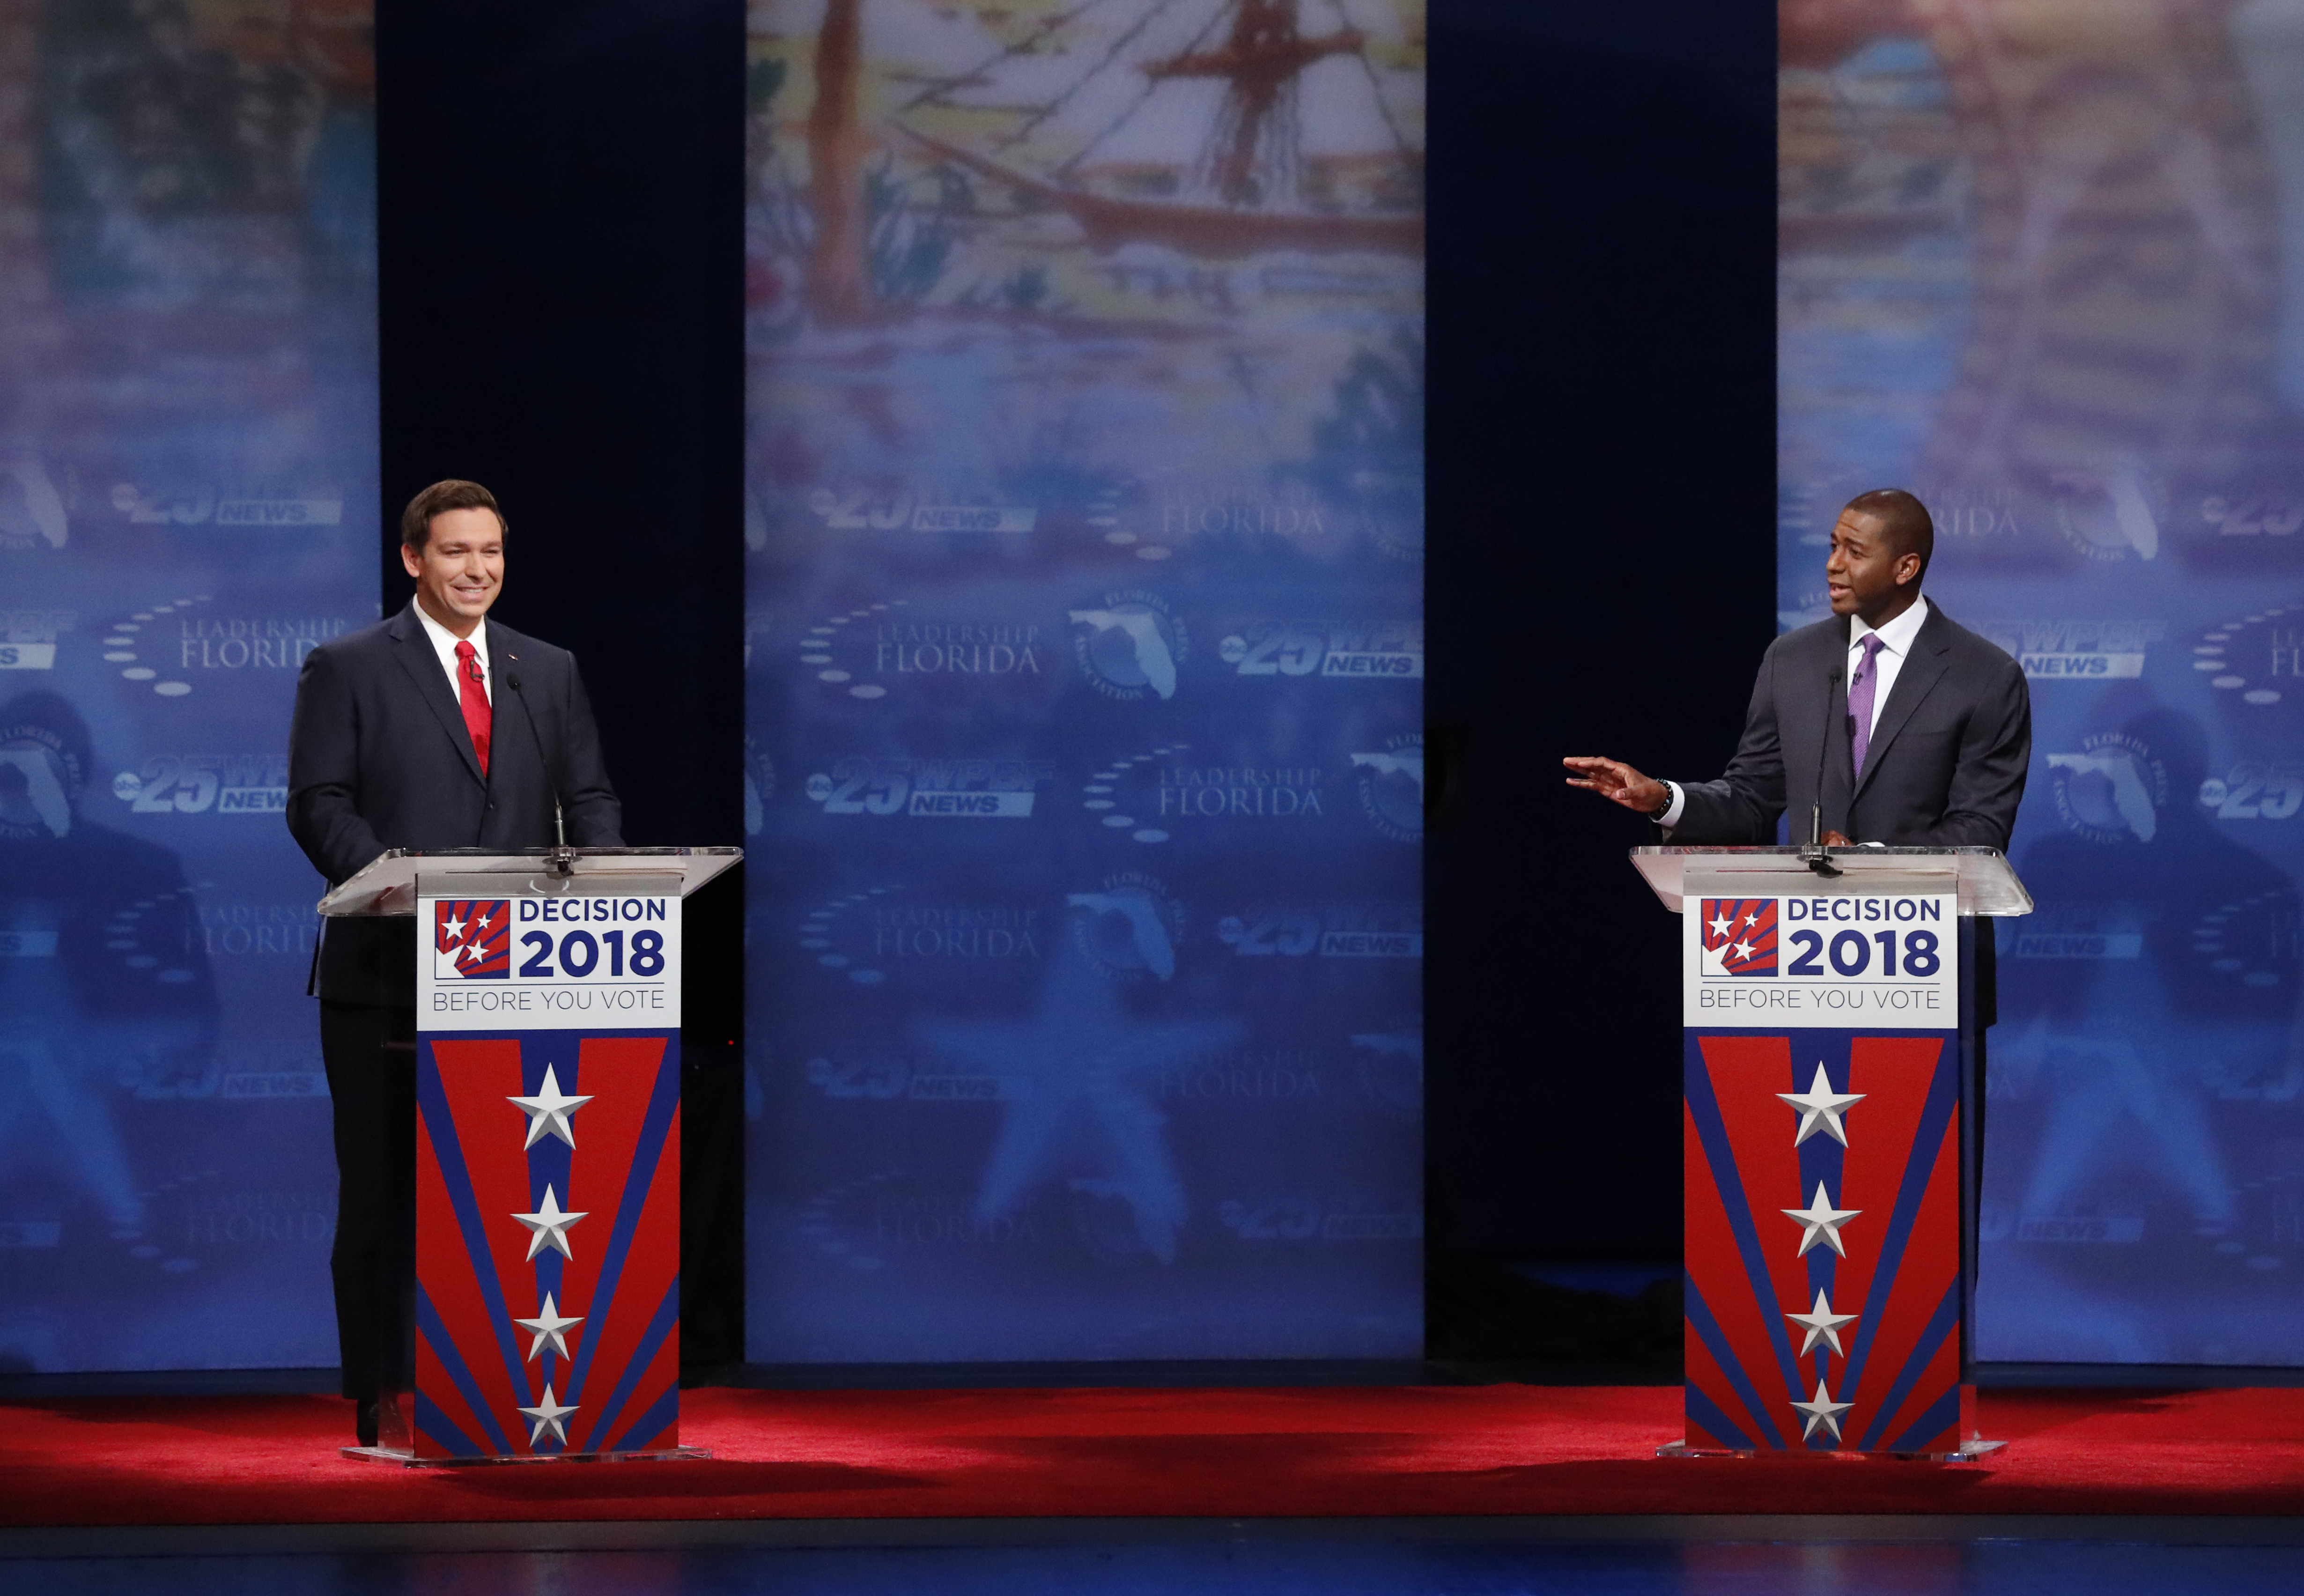 Republican Ron DeSantis (L) and Democrat Andrew Gillum debate at Broward College October 24, 2018 in Davie, Florida. The second and final debate between the two Florida gubernatorial candidates was marked by sharp personal attacks as the November 6 election approaches. (Wilfredo Lee-Pool/Getty Images)